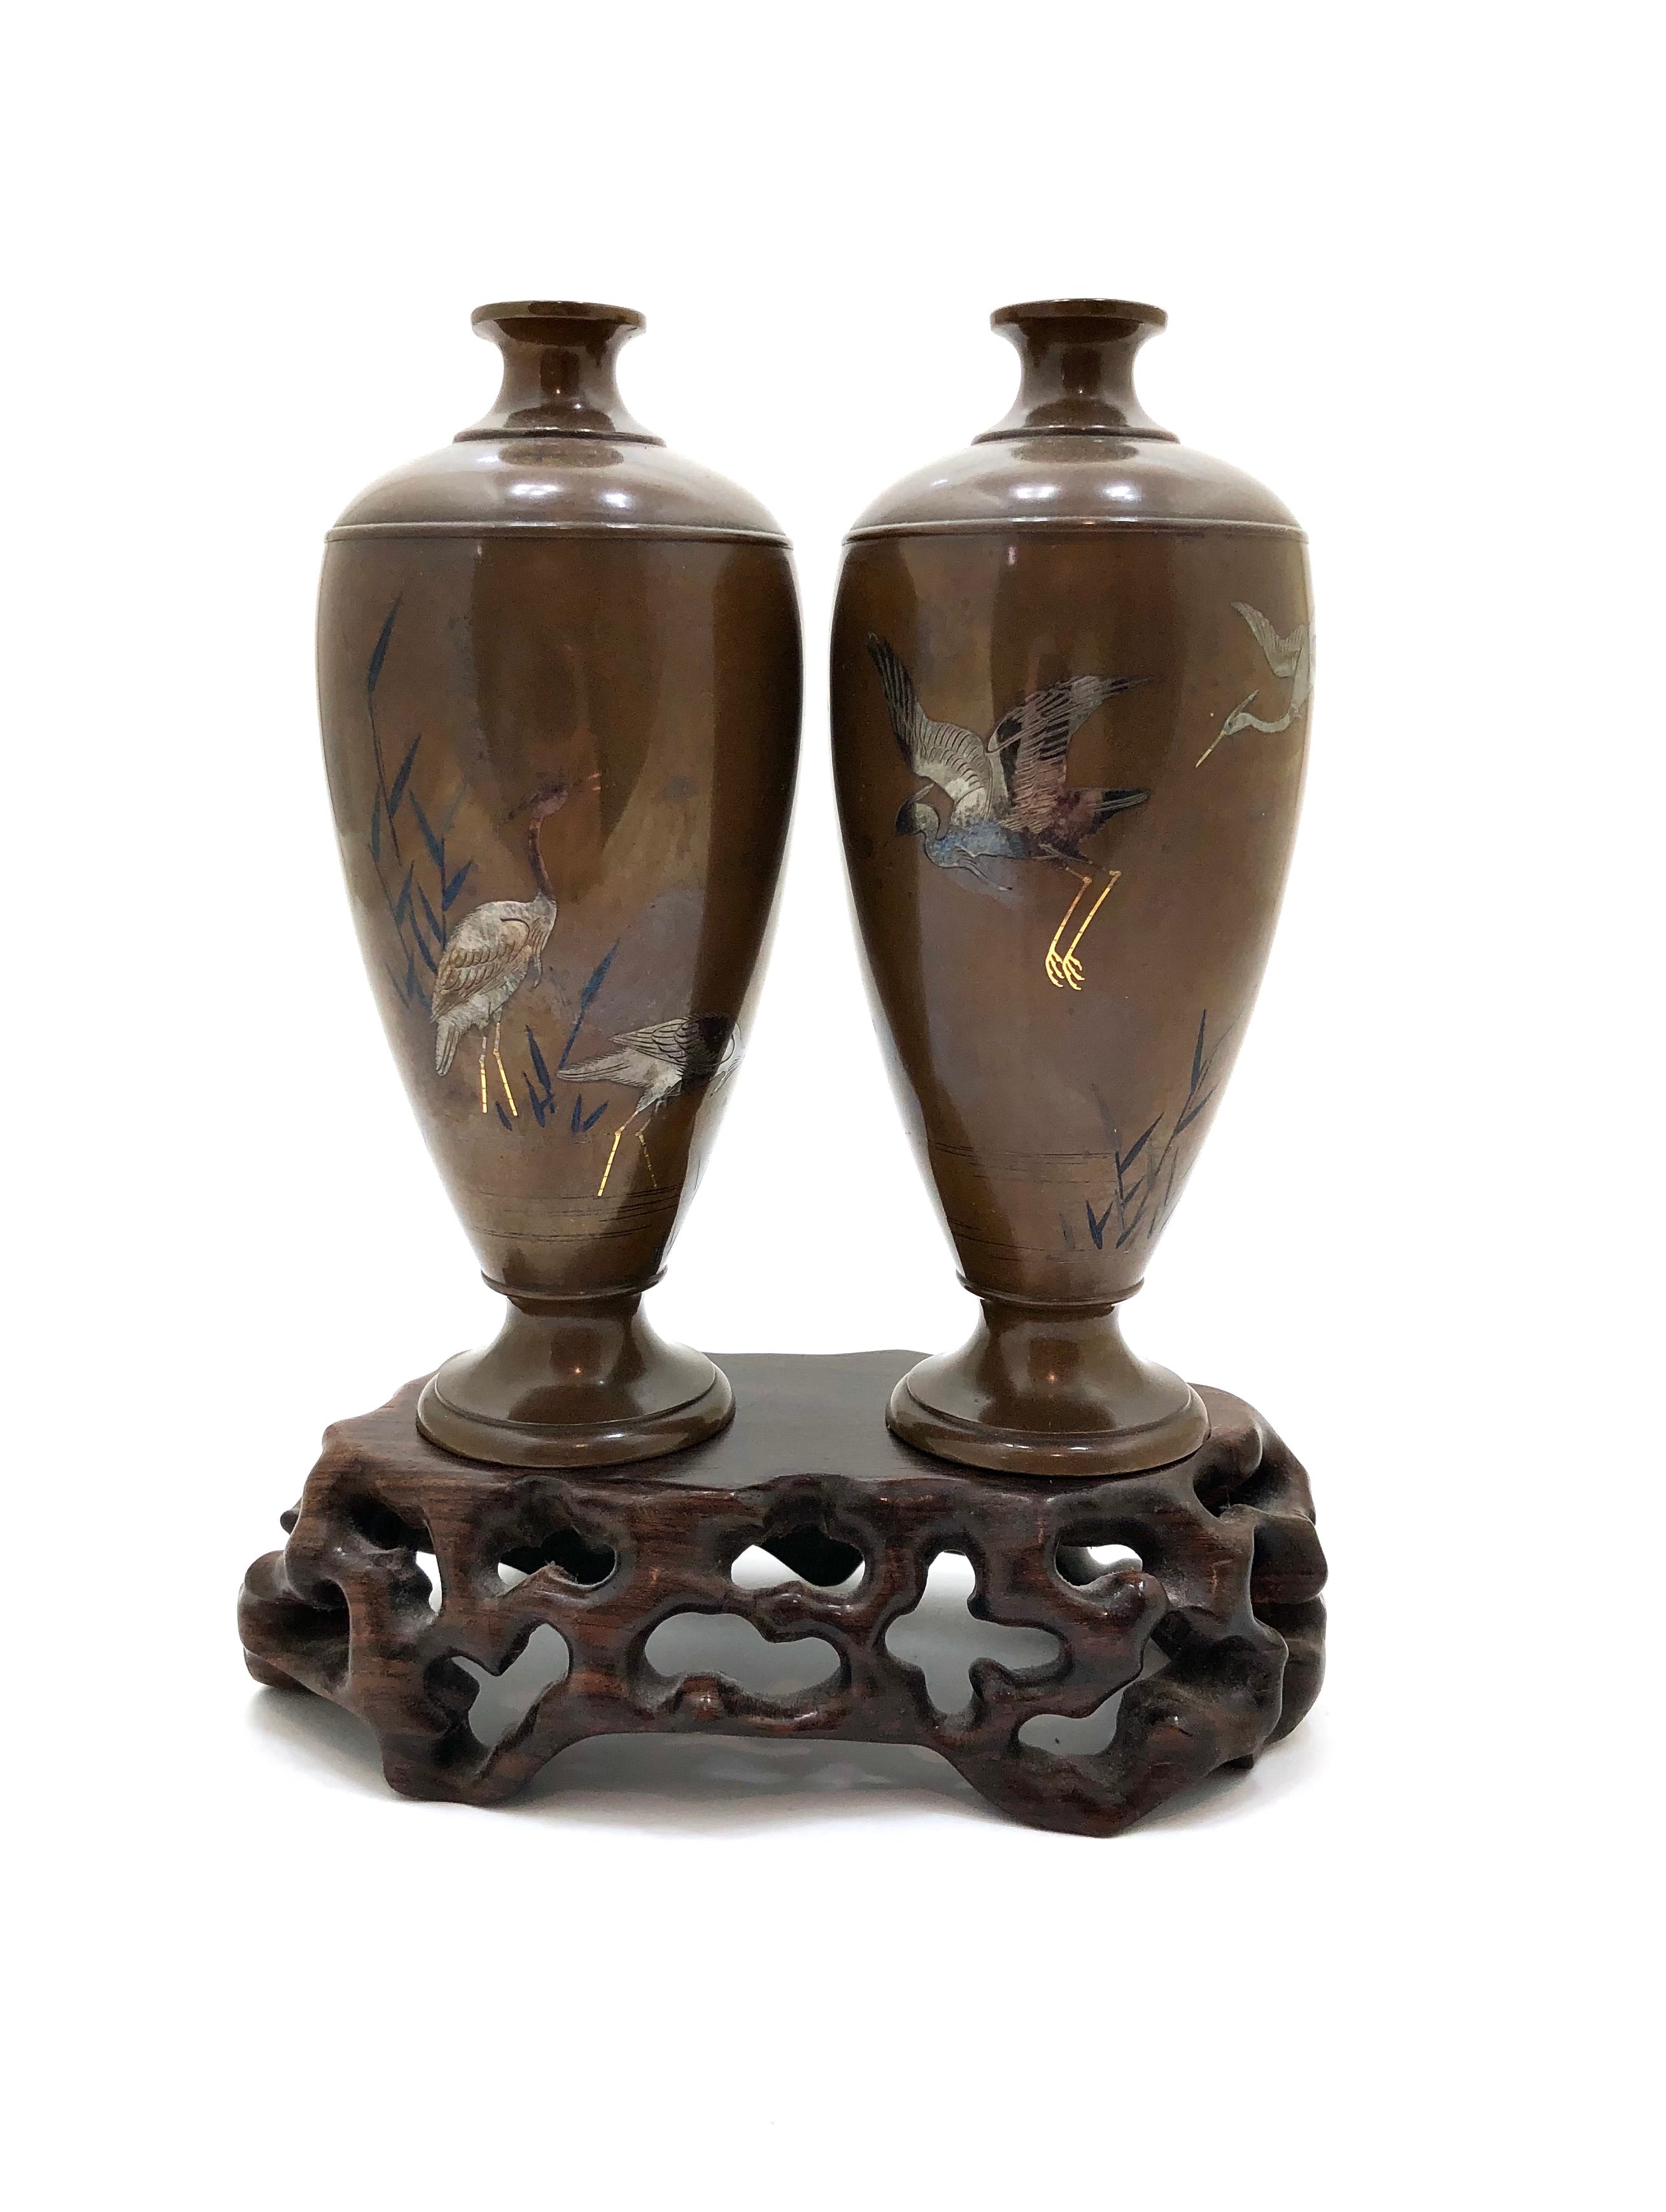 Pair of Antique Japanese Inlaid Bronze Baluster Vase with Snowy Egret Decoration in gold and silver